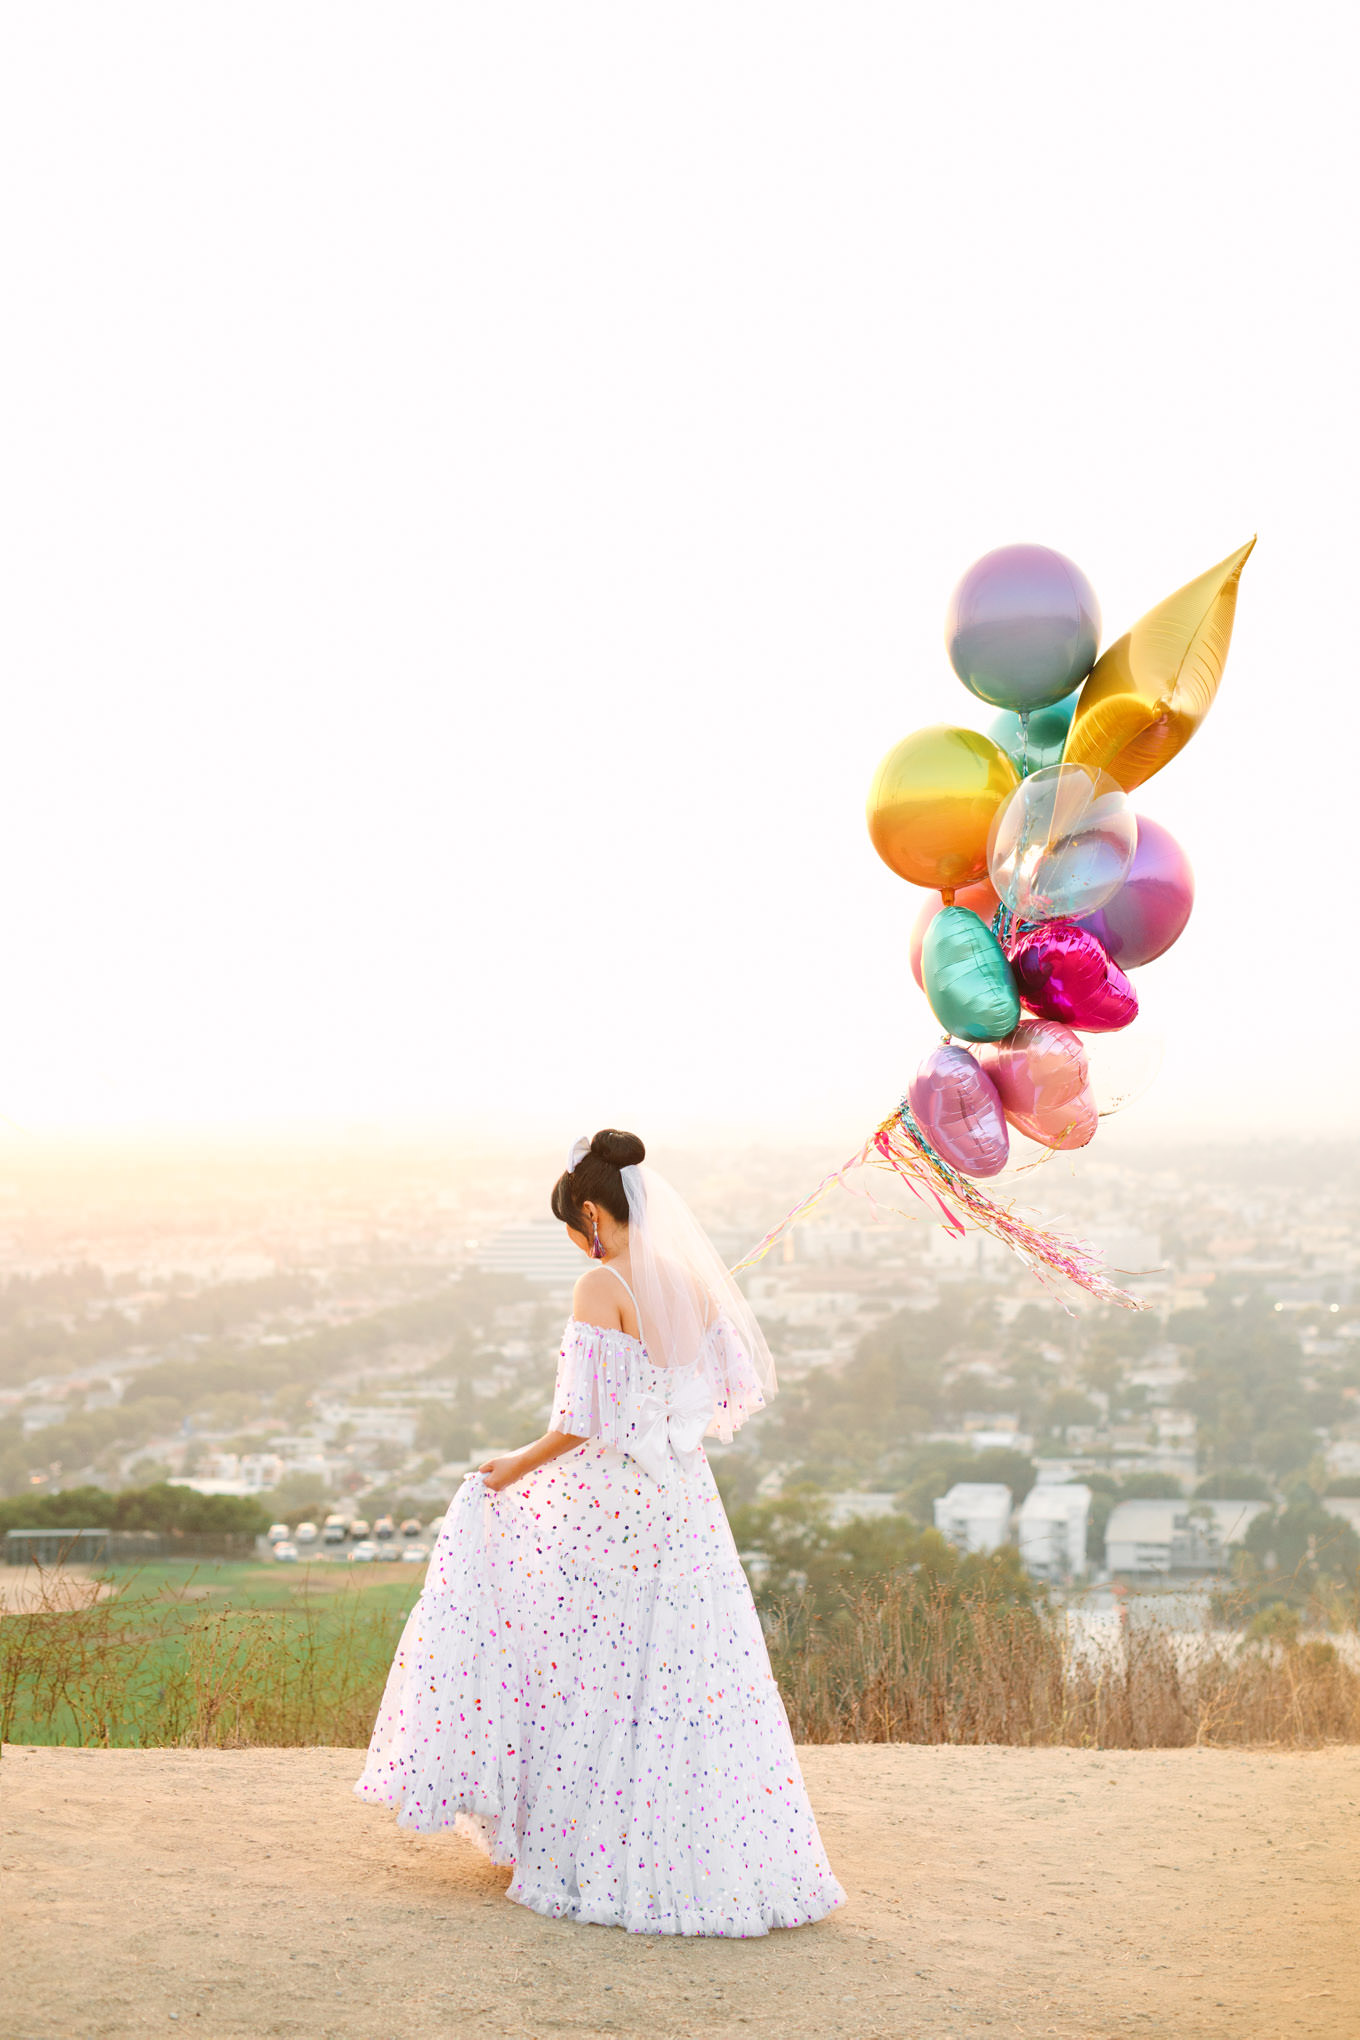 Bride carrying balloons in confetti dress | Engagement, elopement, and wedding photography roundup of Mary Costa’s favorite images from 2020 | Colorful and elevated photography for fun-loving couples in Southern California | #2020wedding #elopement #weddingphoto #weddingphotography #microwedding   Source: Mary Costa Photography | Los Angeles